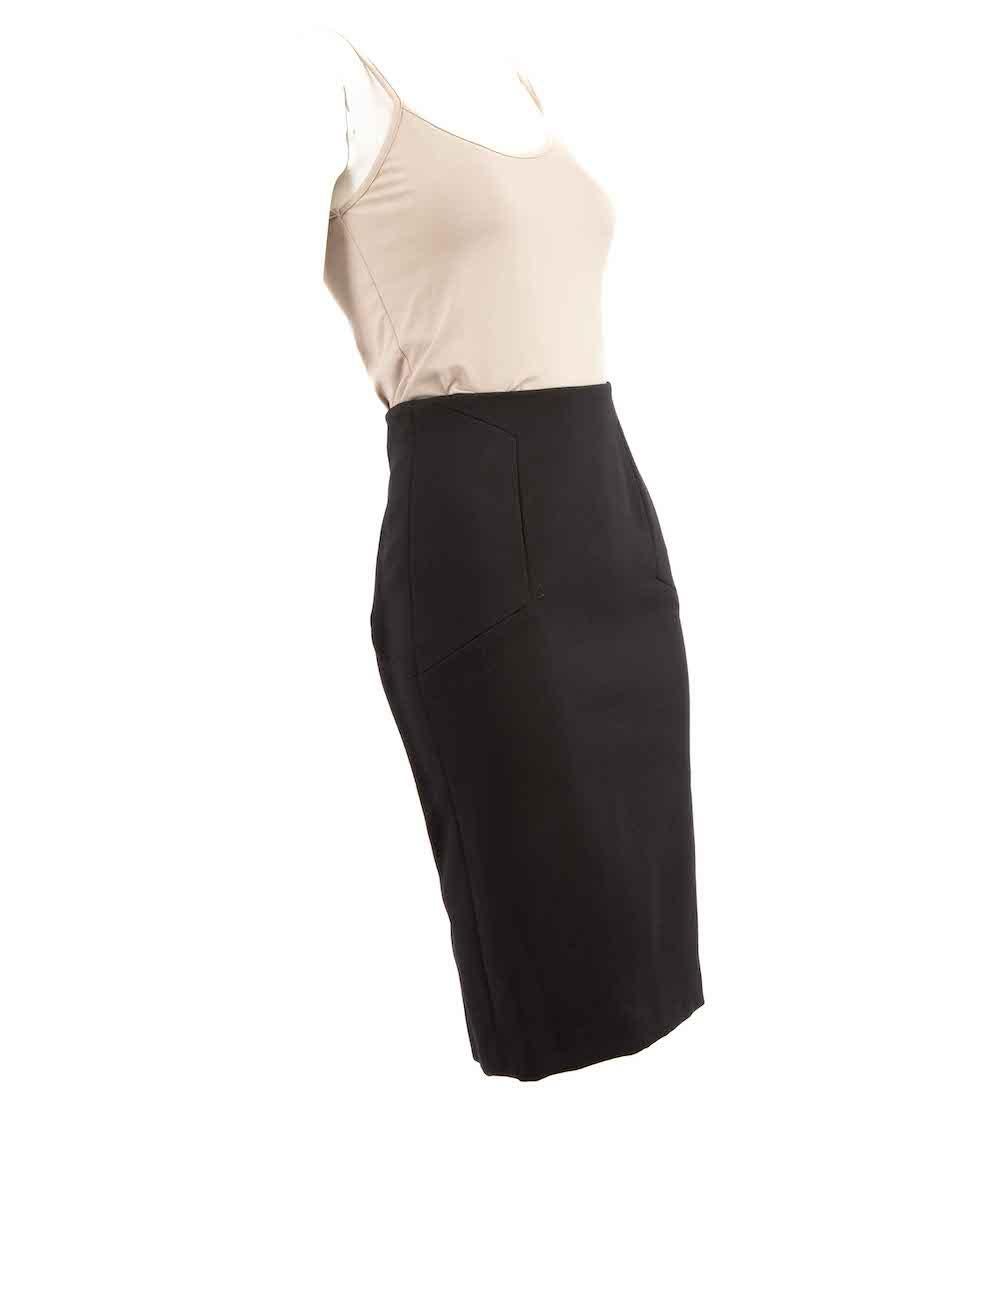 CONDITION is Very good. Minimal wear to skirt is evident. Minimal discolouration to inside hem on this used Victoria Beckham designer resale item.
 
 Details
 Black
 Wool
 Pencil skirt
 Midi
 Back open ended zip fastening
 Figure hugging fit
 
 
